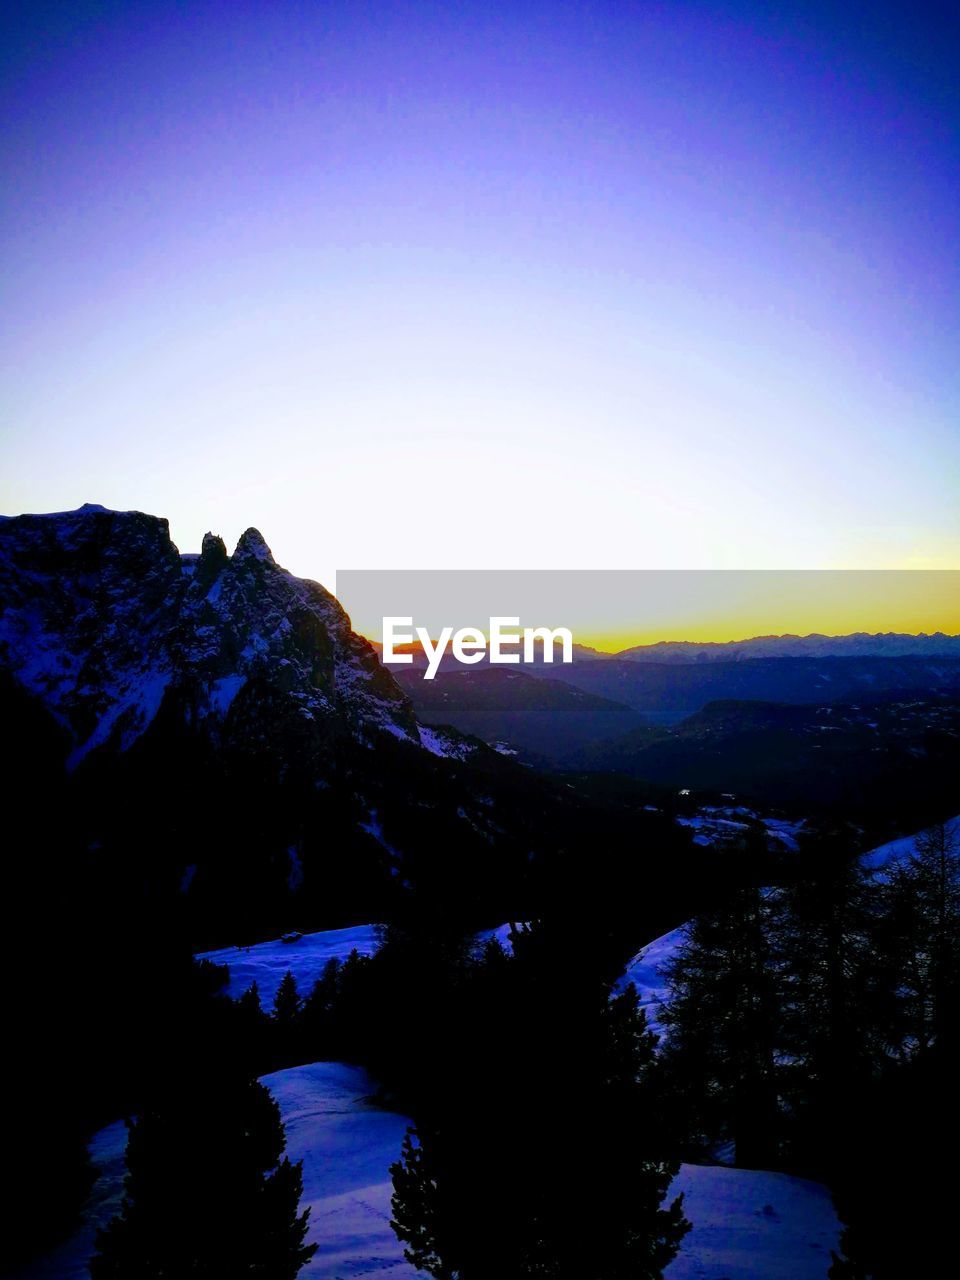 SCENIC VIEW OF MOUNTAINS AGAINST CLEAR SKY AT SUNSET